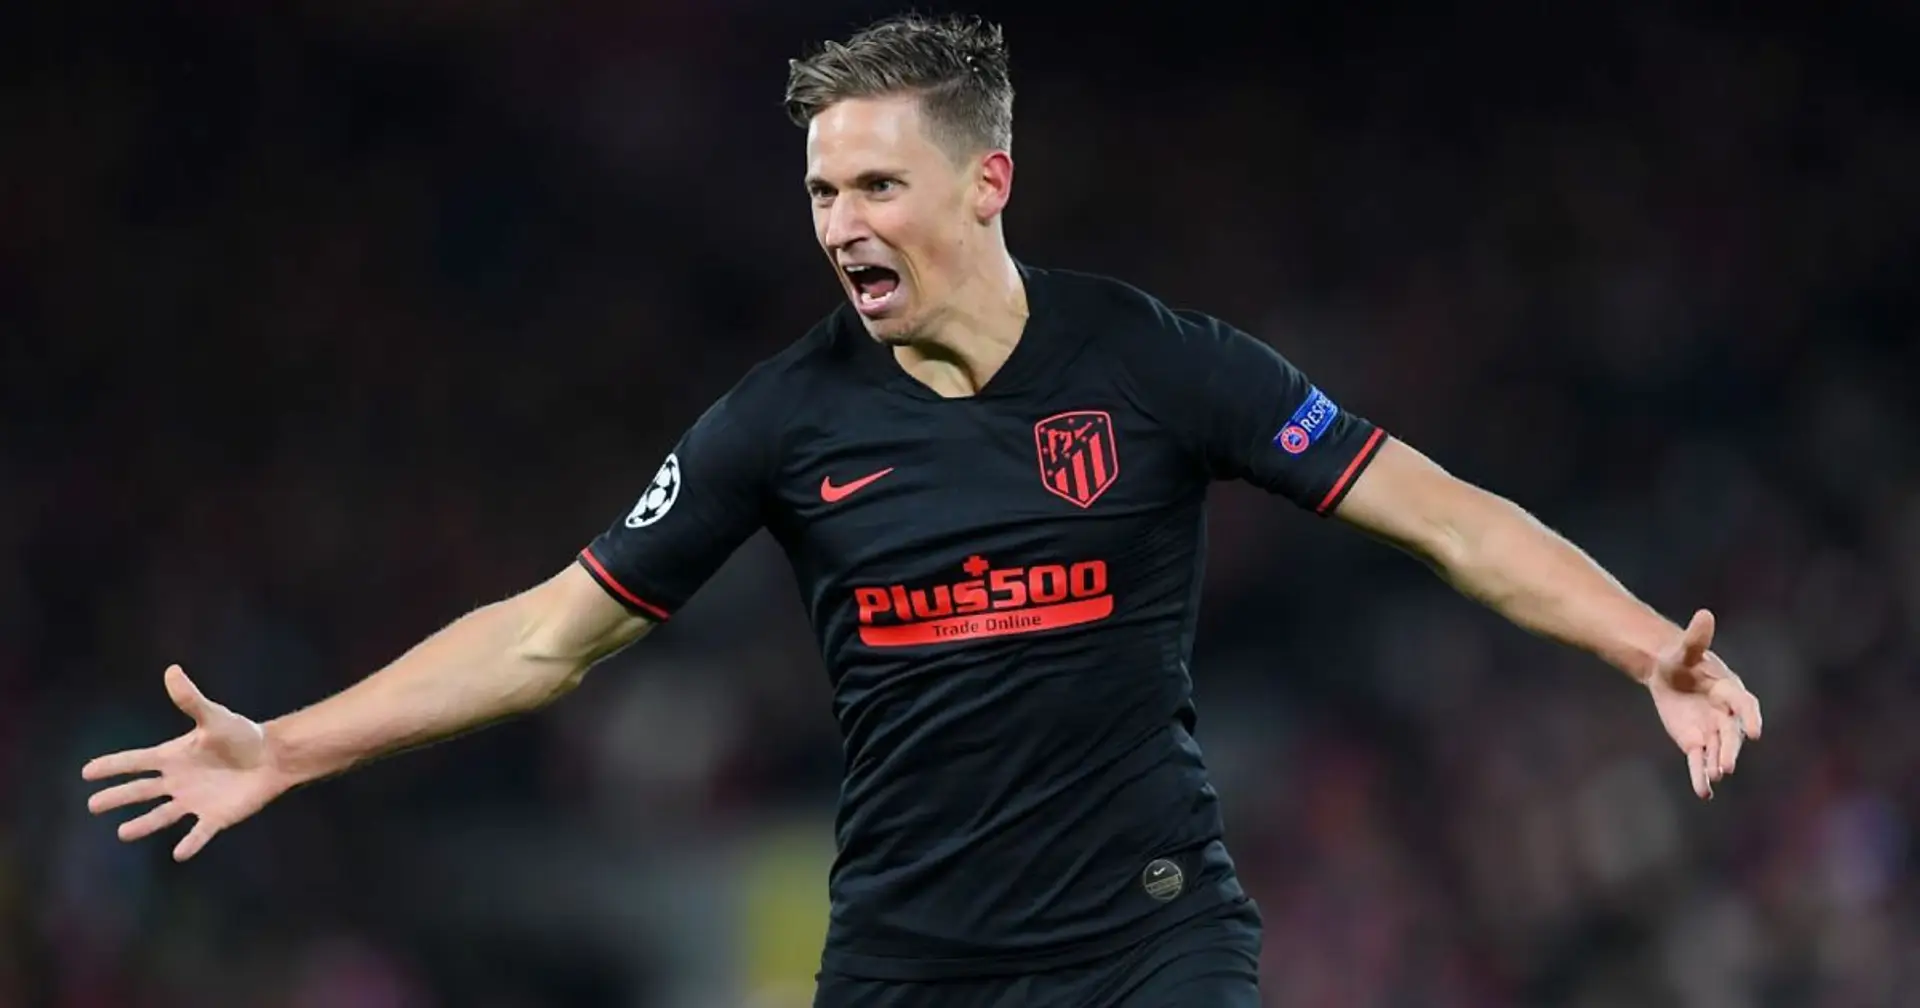 ‘He’s on Bruno level and will make immediate impact': United fan explains why Marcos Llorente’s the perfect midfield signing amid rumors of new bid